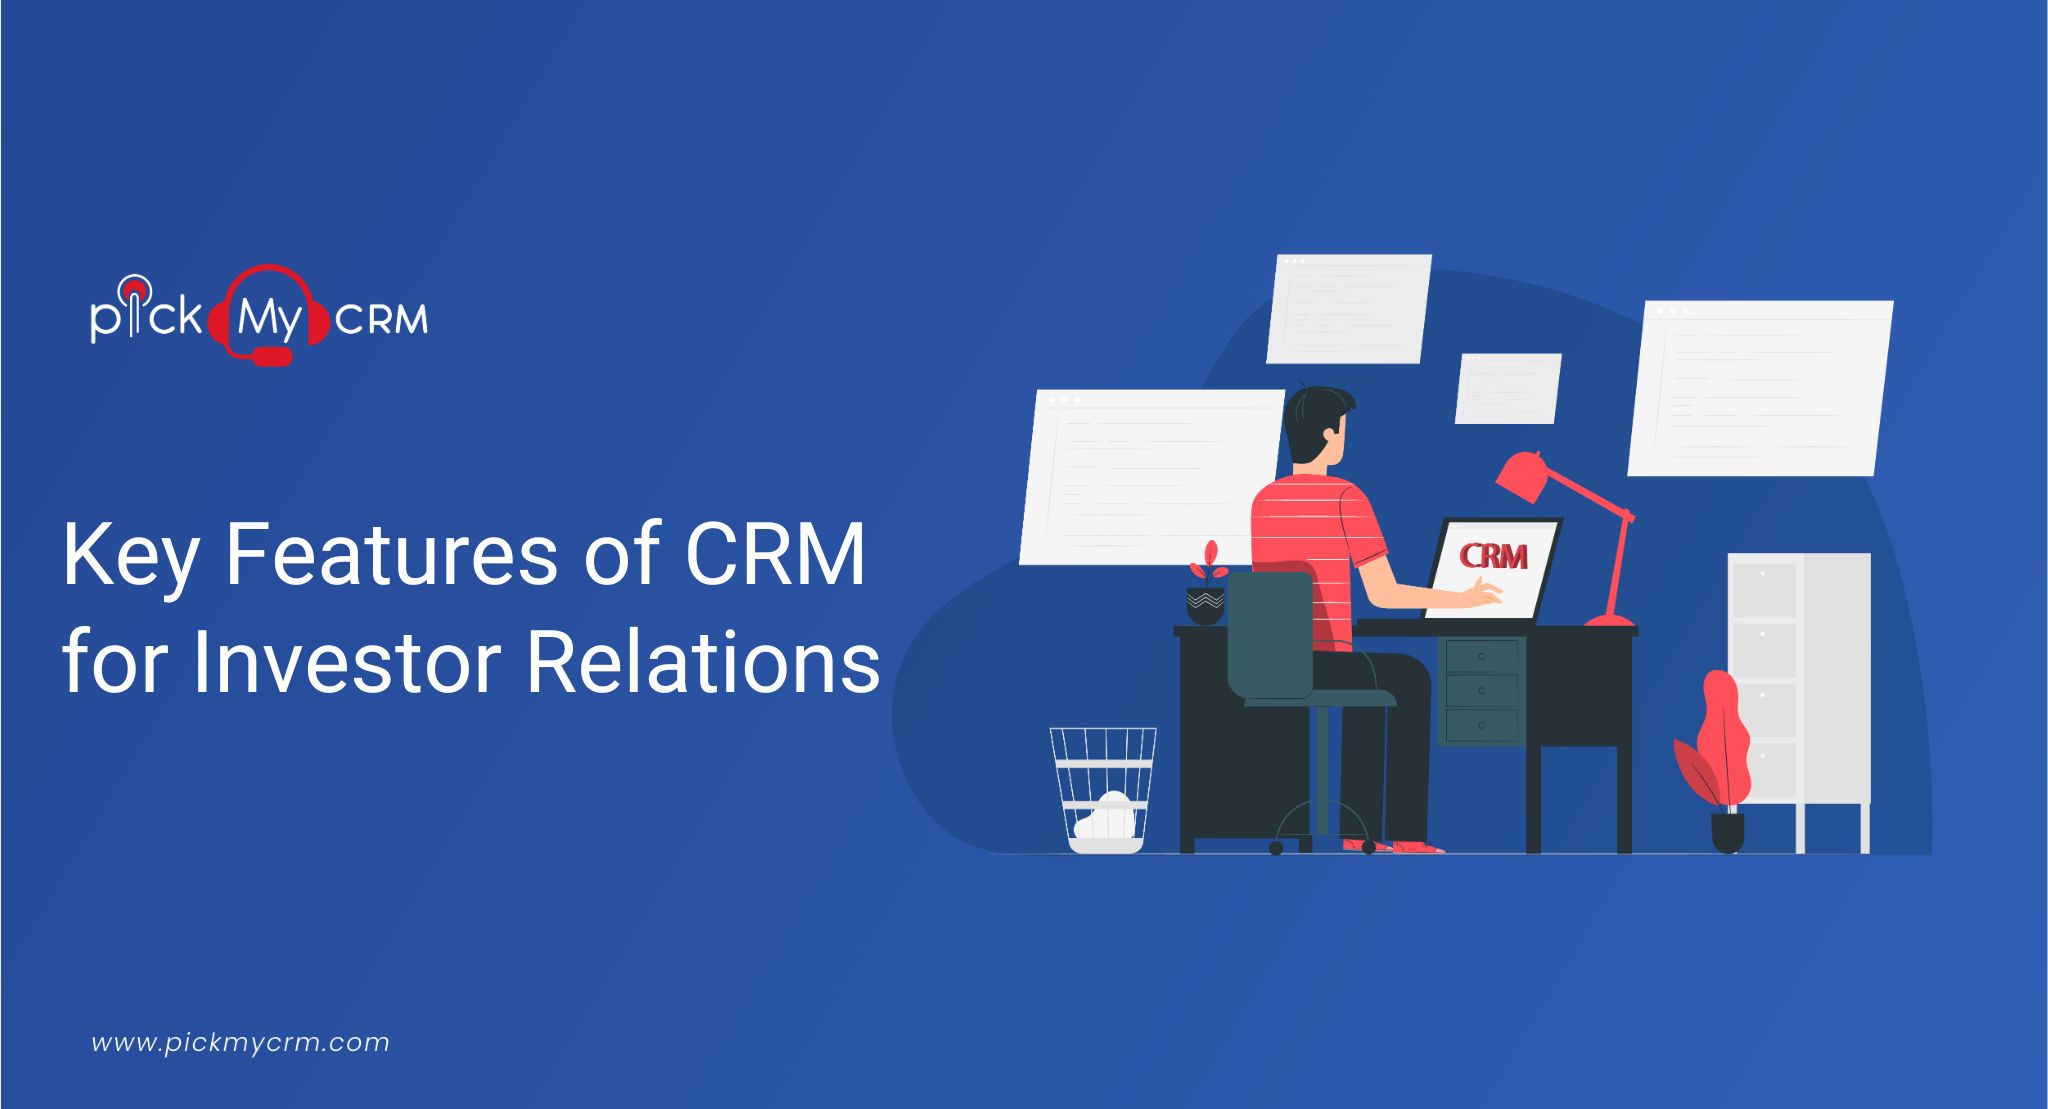 Key Features of CRM for Investor Relations